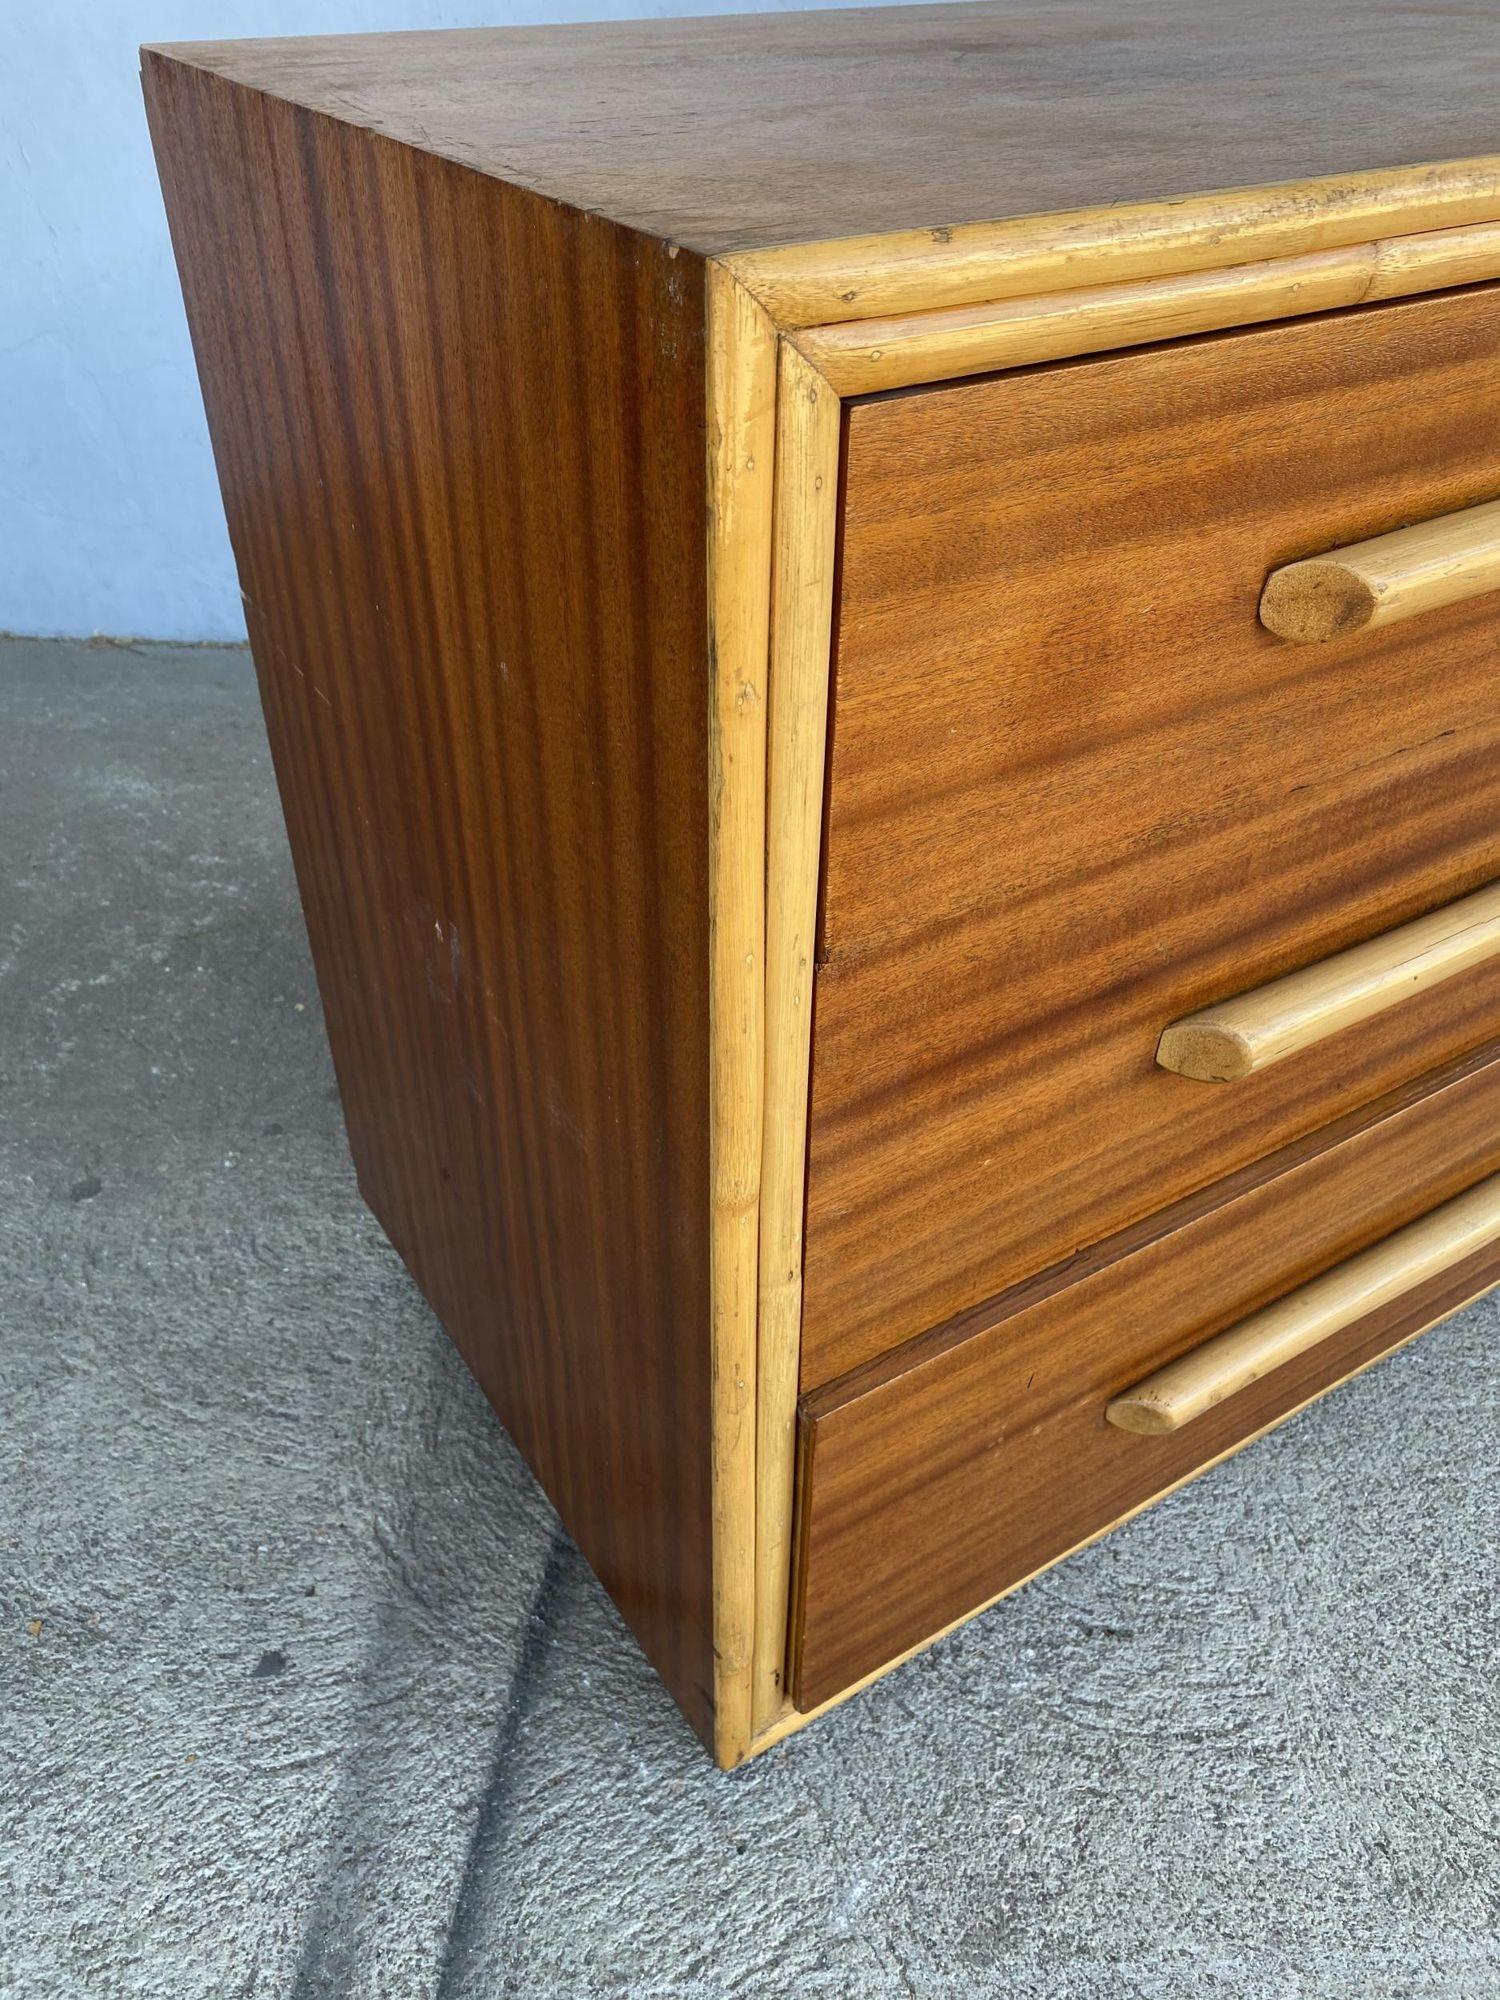 Mid-20th Century Restored Mahogany Lowboy Dresser Nightstand W/ Rattan Accents For Sale